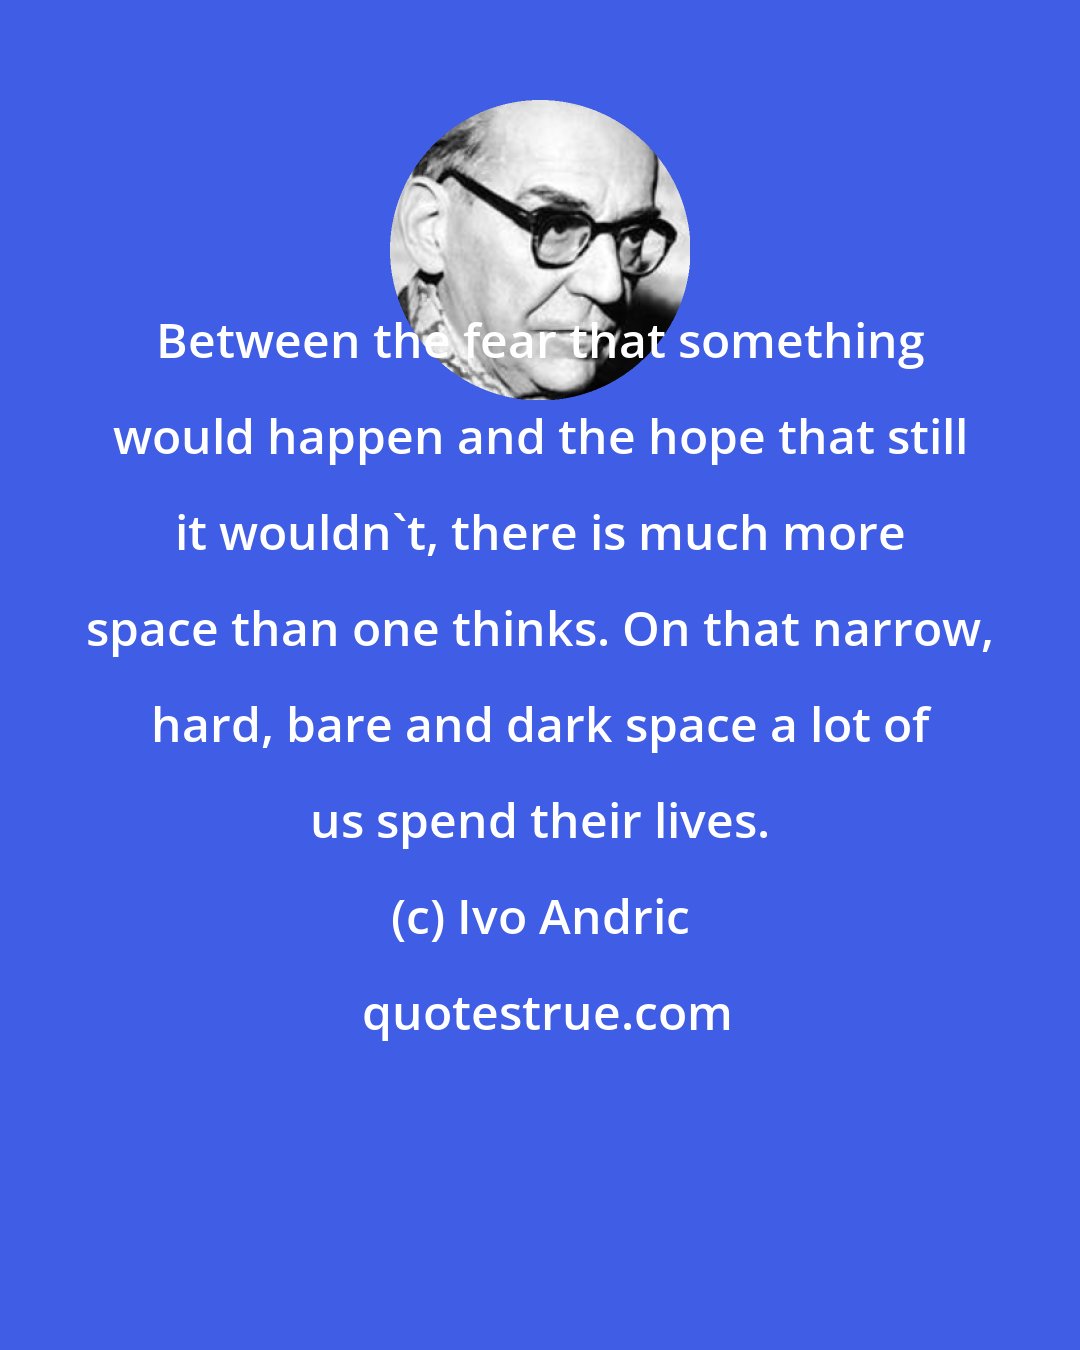 Ivo Andric: Between the fear that something would happen and the hope that still it wouldn't, there is much more space than one thinks. On that narrow, hard, bare and dark space a lot of us spend their lives.